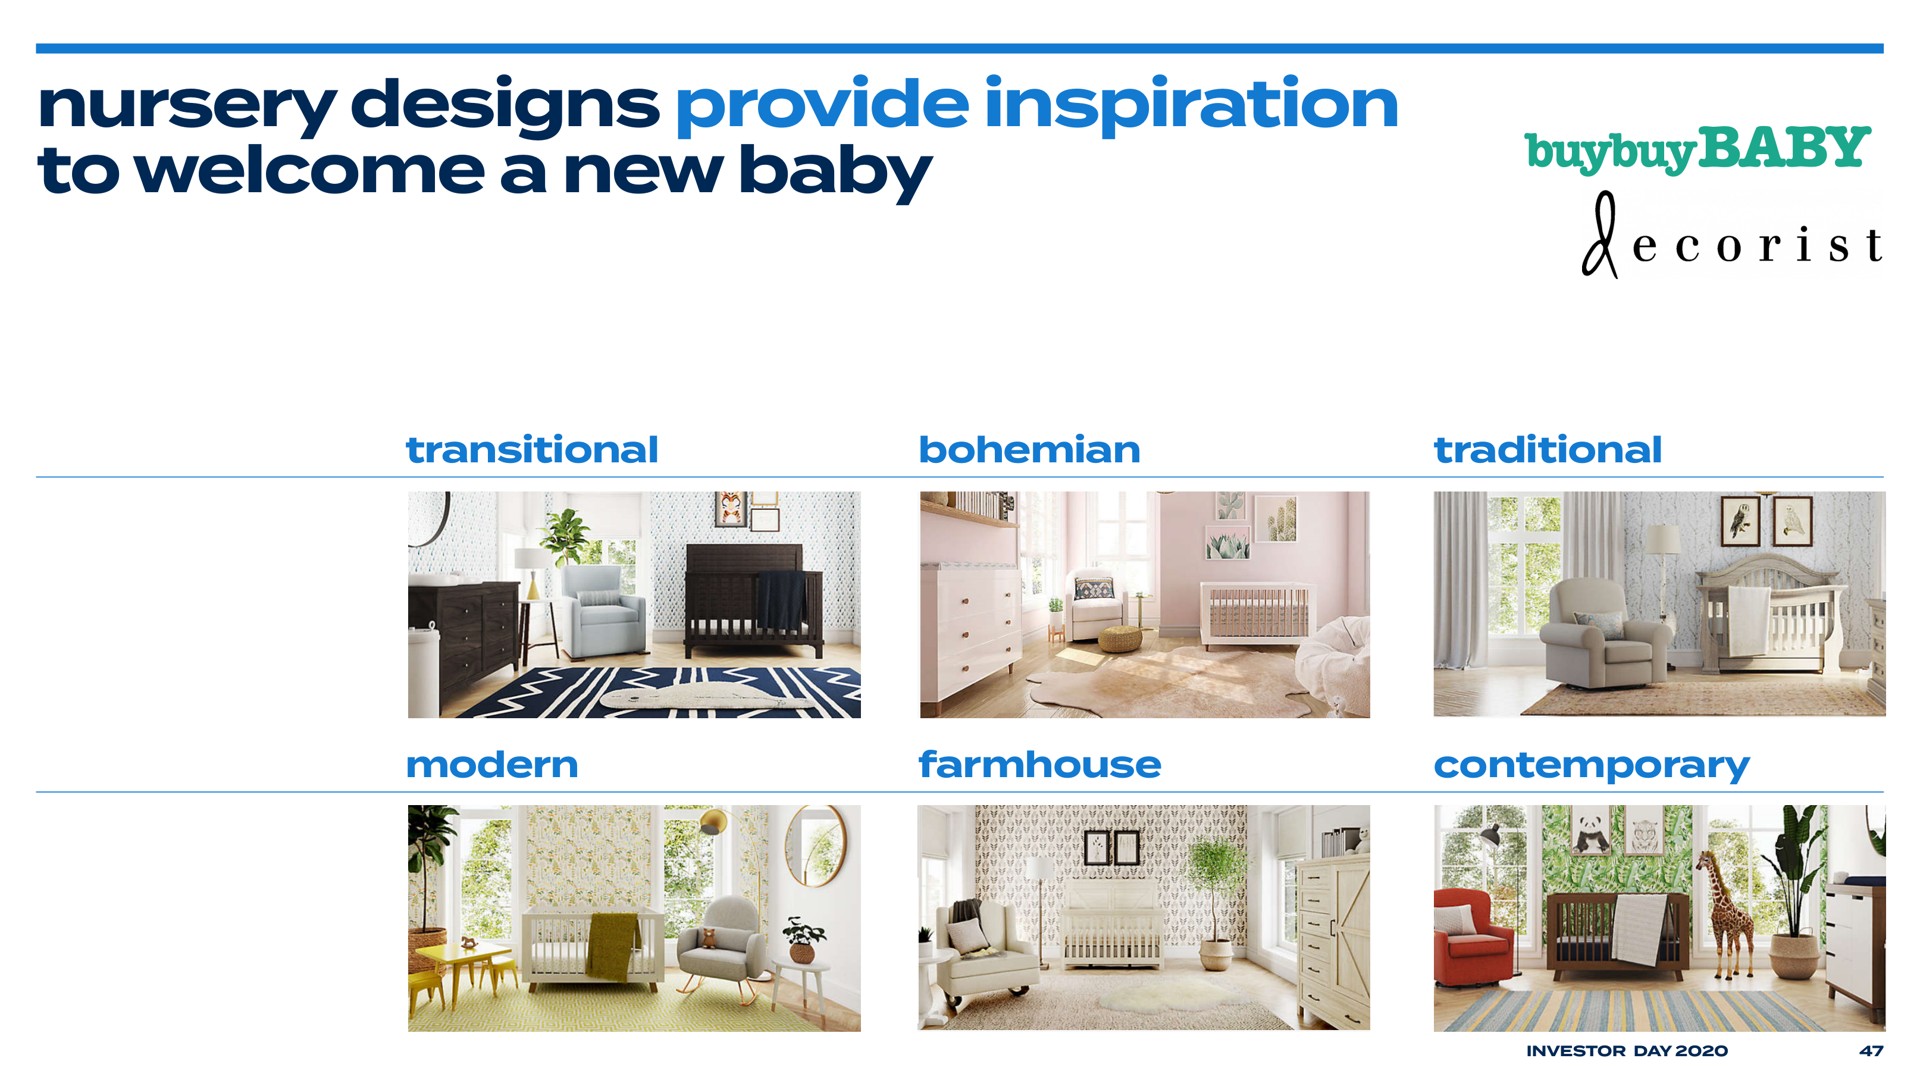 nursery designs provide inspiration to welcome a new baby | Bed Bath & Beyond